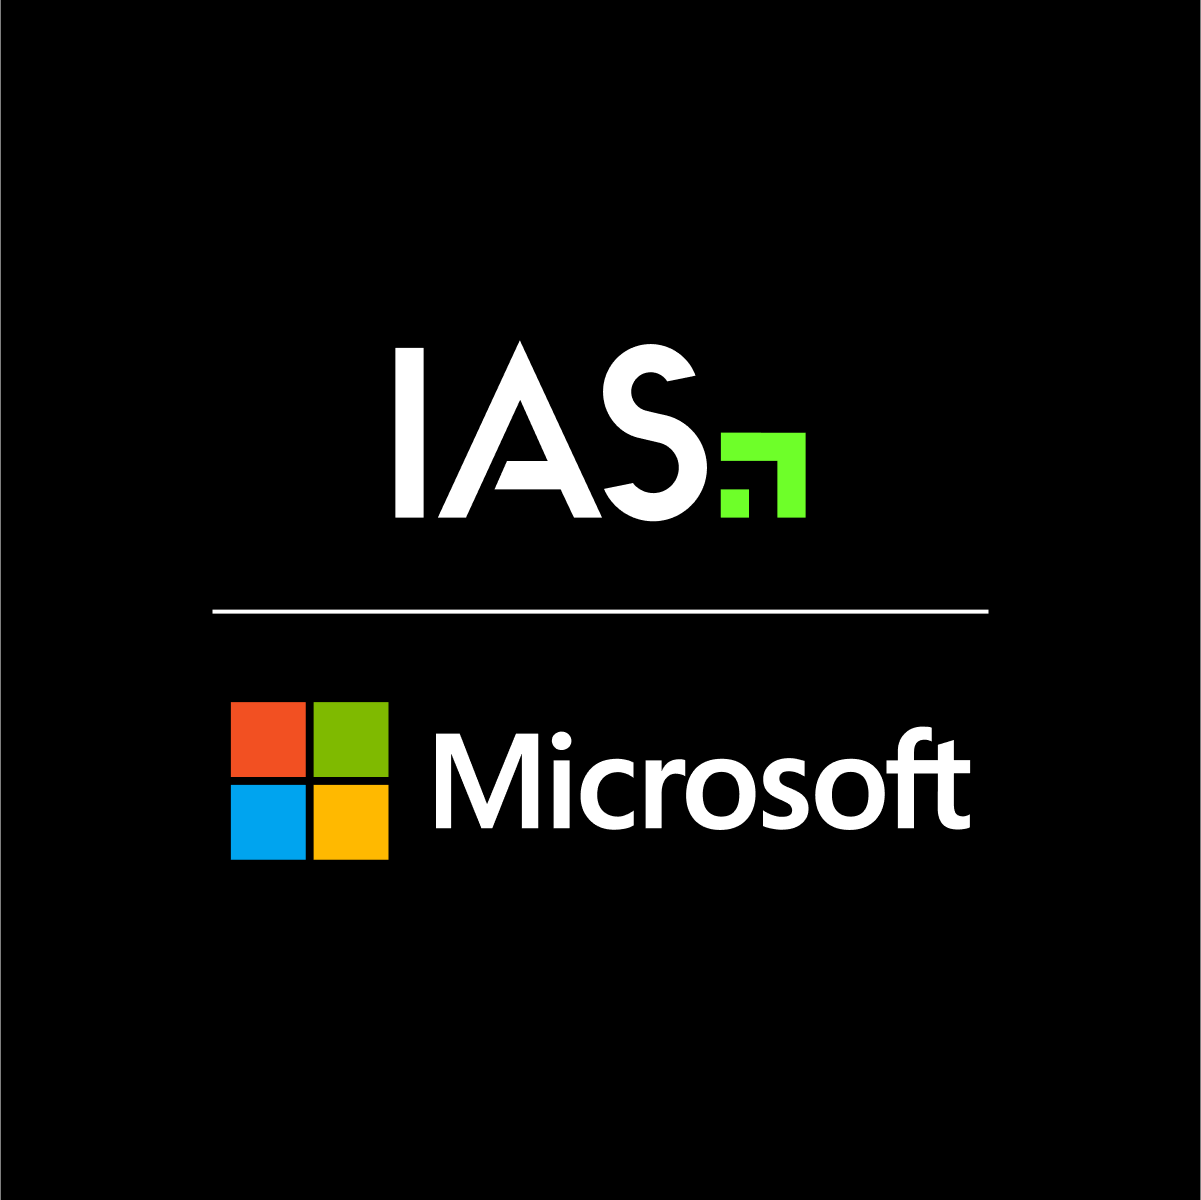 IAS extends collaboration with Microsoft Advertising.